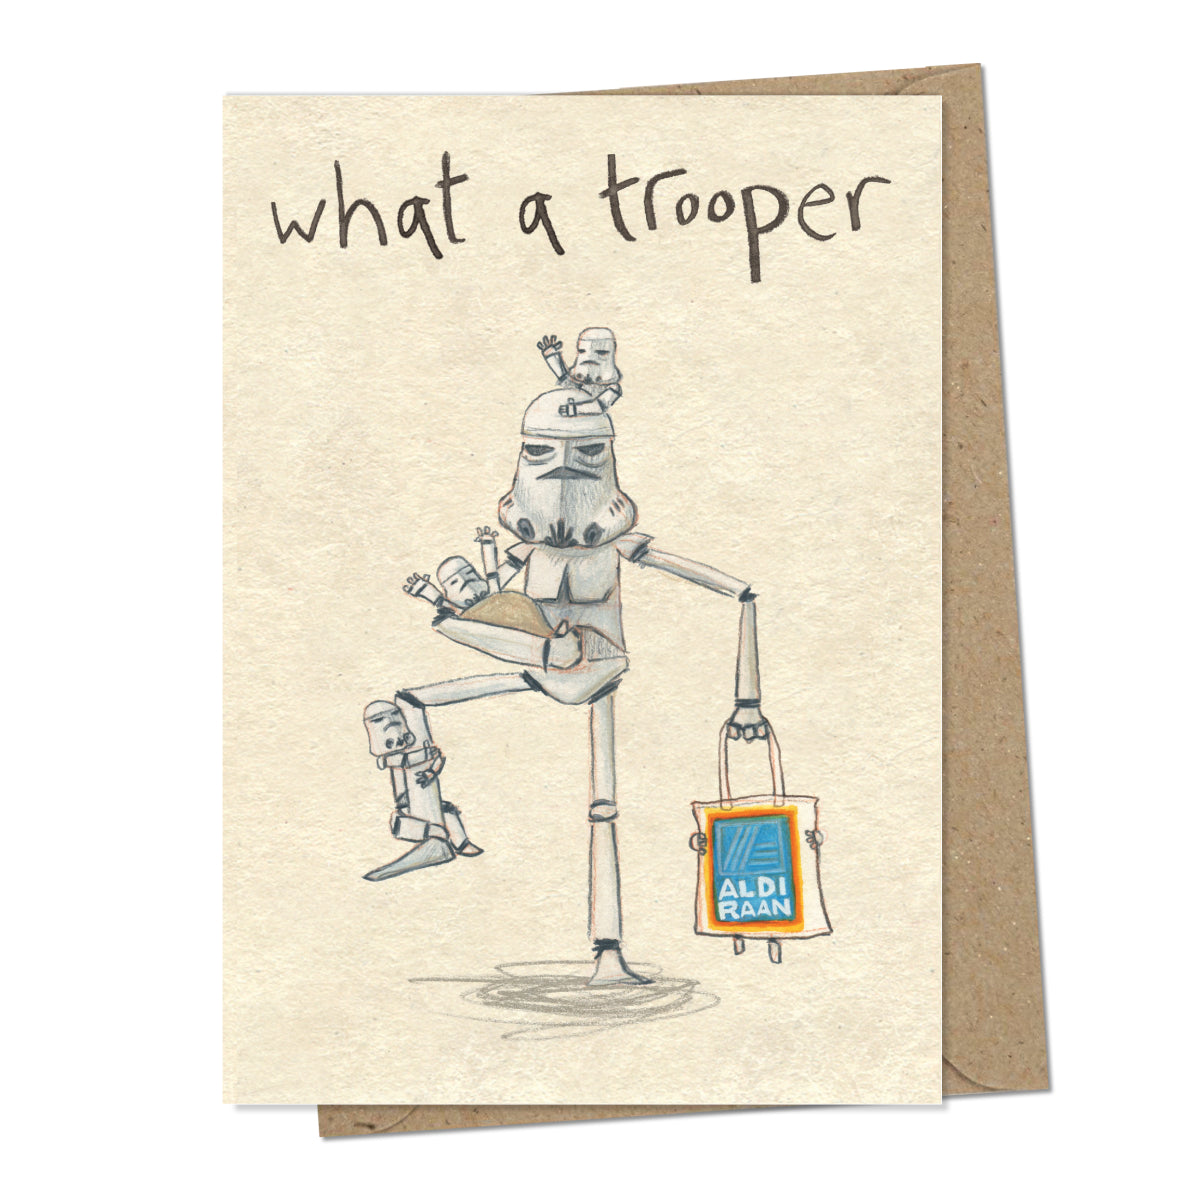 A greetings card with a mottled beige background and above the illustration are handwritten words &#39;what a trooper&#39;. The illustration is of a white Storm Trooper from the movie Star Wars wrangling mini Storm Troopers including a baby one, struggling to hold them all. In another hand they are holding a carrier bag that is in the style of one from Aldi but is a play on words referencing a planet in the Star Wars Universe - Aldi-raan.